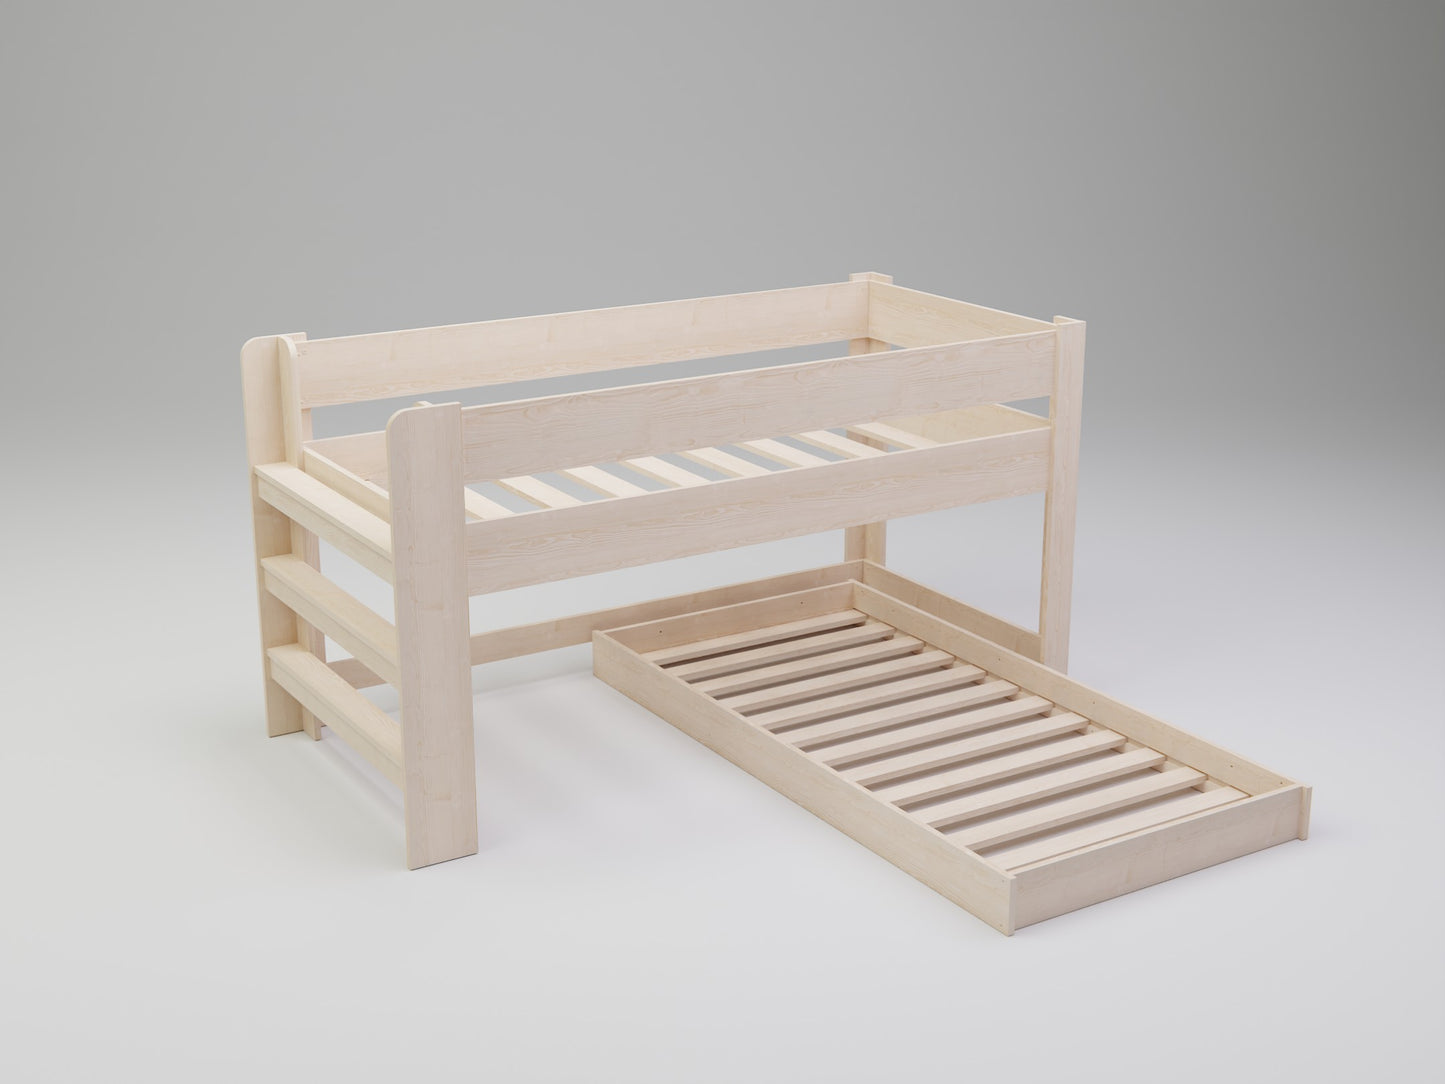 Prioritise child safety: Our L shaped loft beds are designed lower for your child's security and peace of mind.